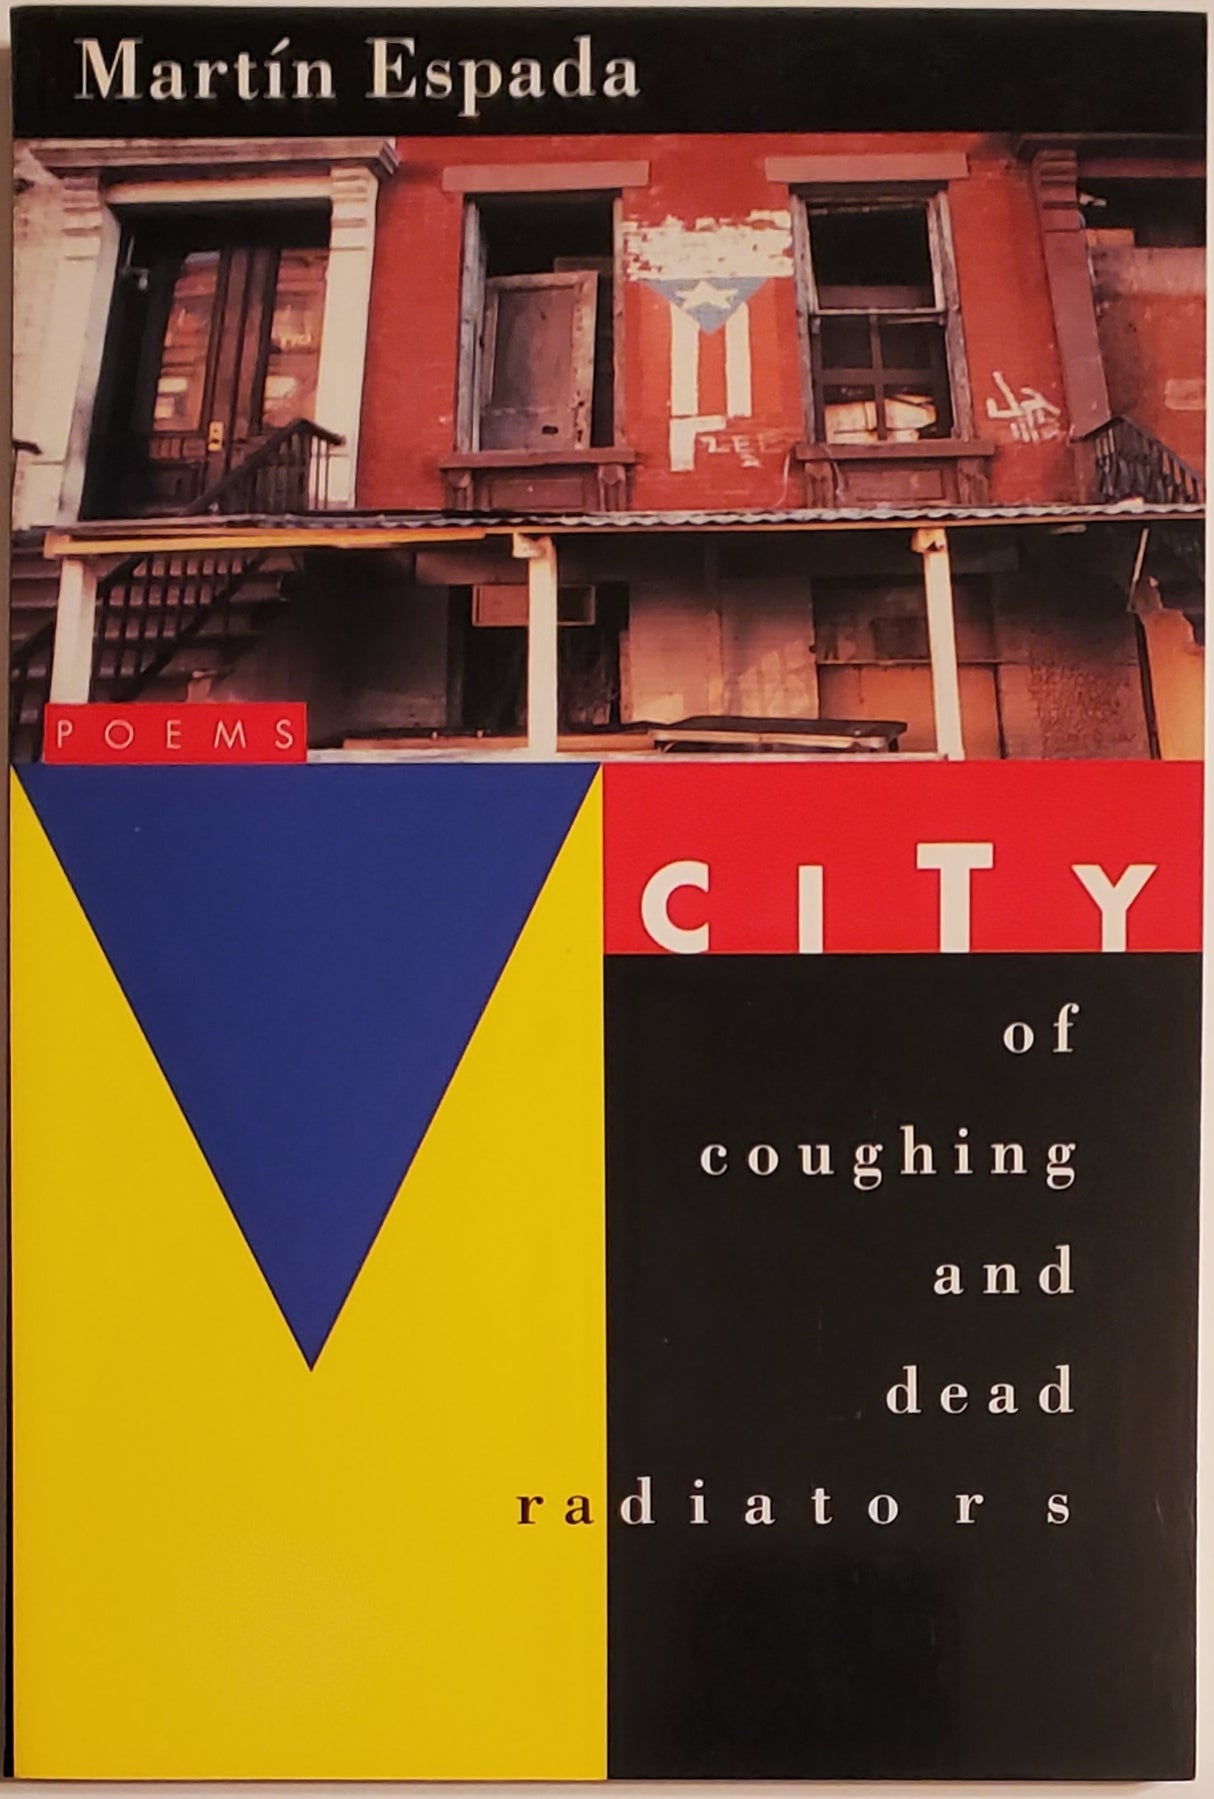 [Book #29279] CITY OF COUGHING AND DEAD RADIATORS. Martin Espada.